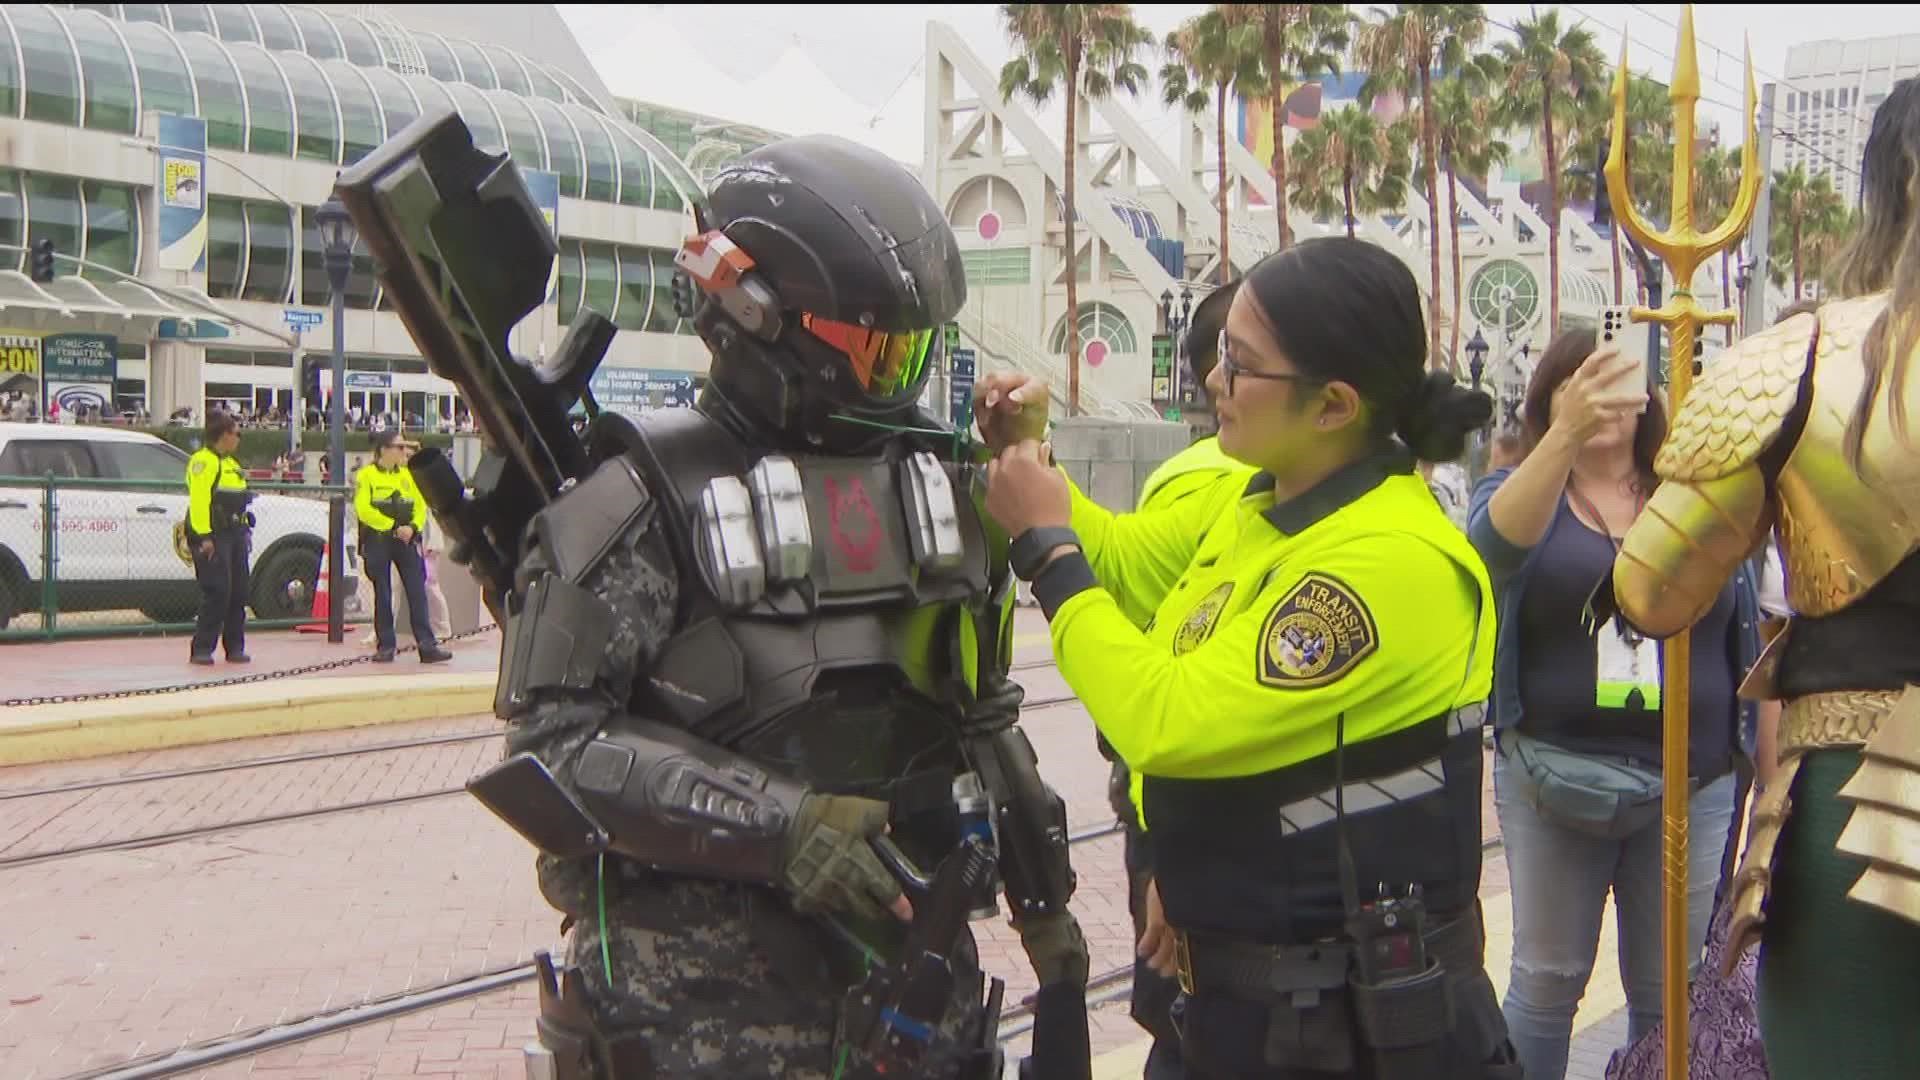 San Diego Police Department has increased officers downtown for Comic-Con and has a mobile command post already set-up outside the convention for preview night.